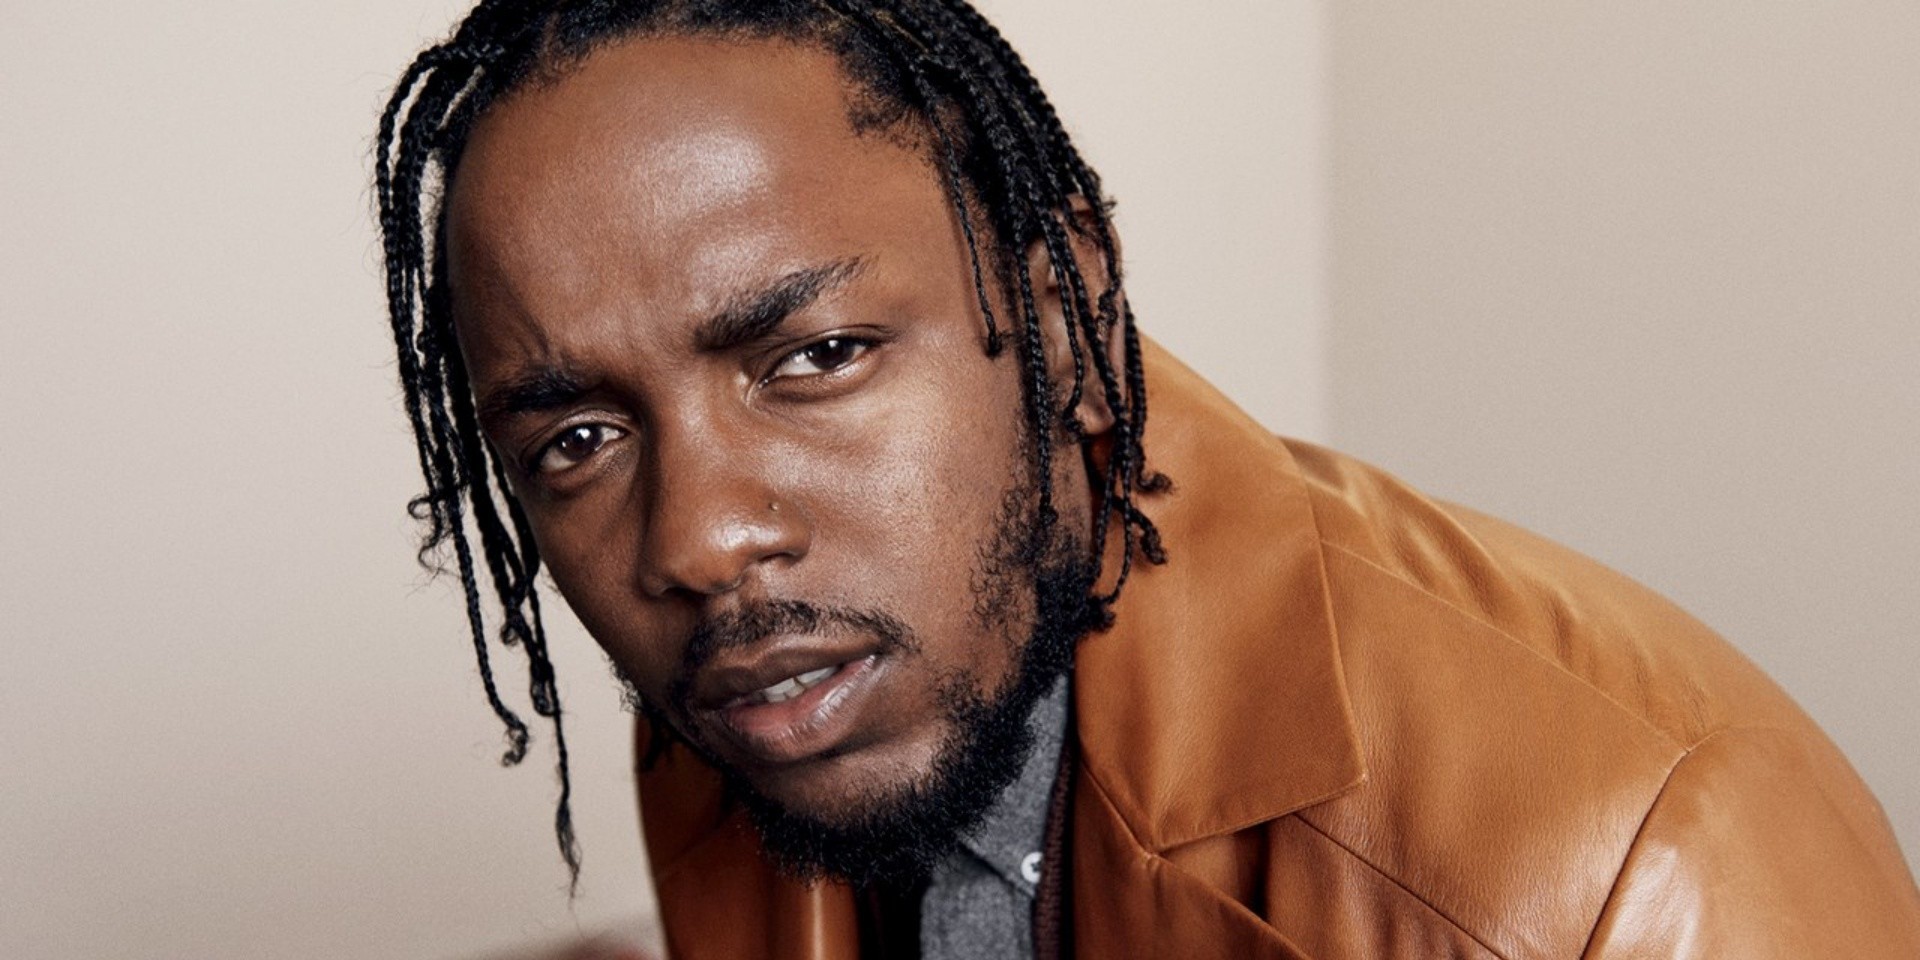 Kendrick Lamar announces new album 'Mr. Morale & The Big Steppers' this May